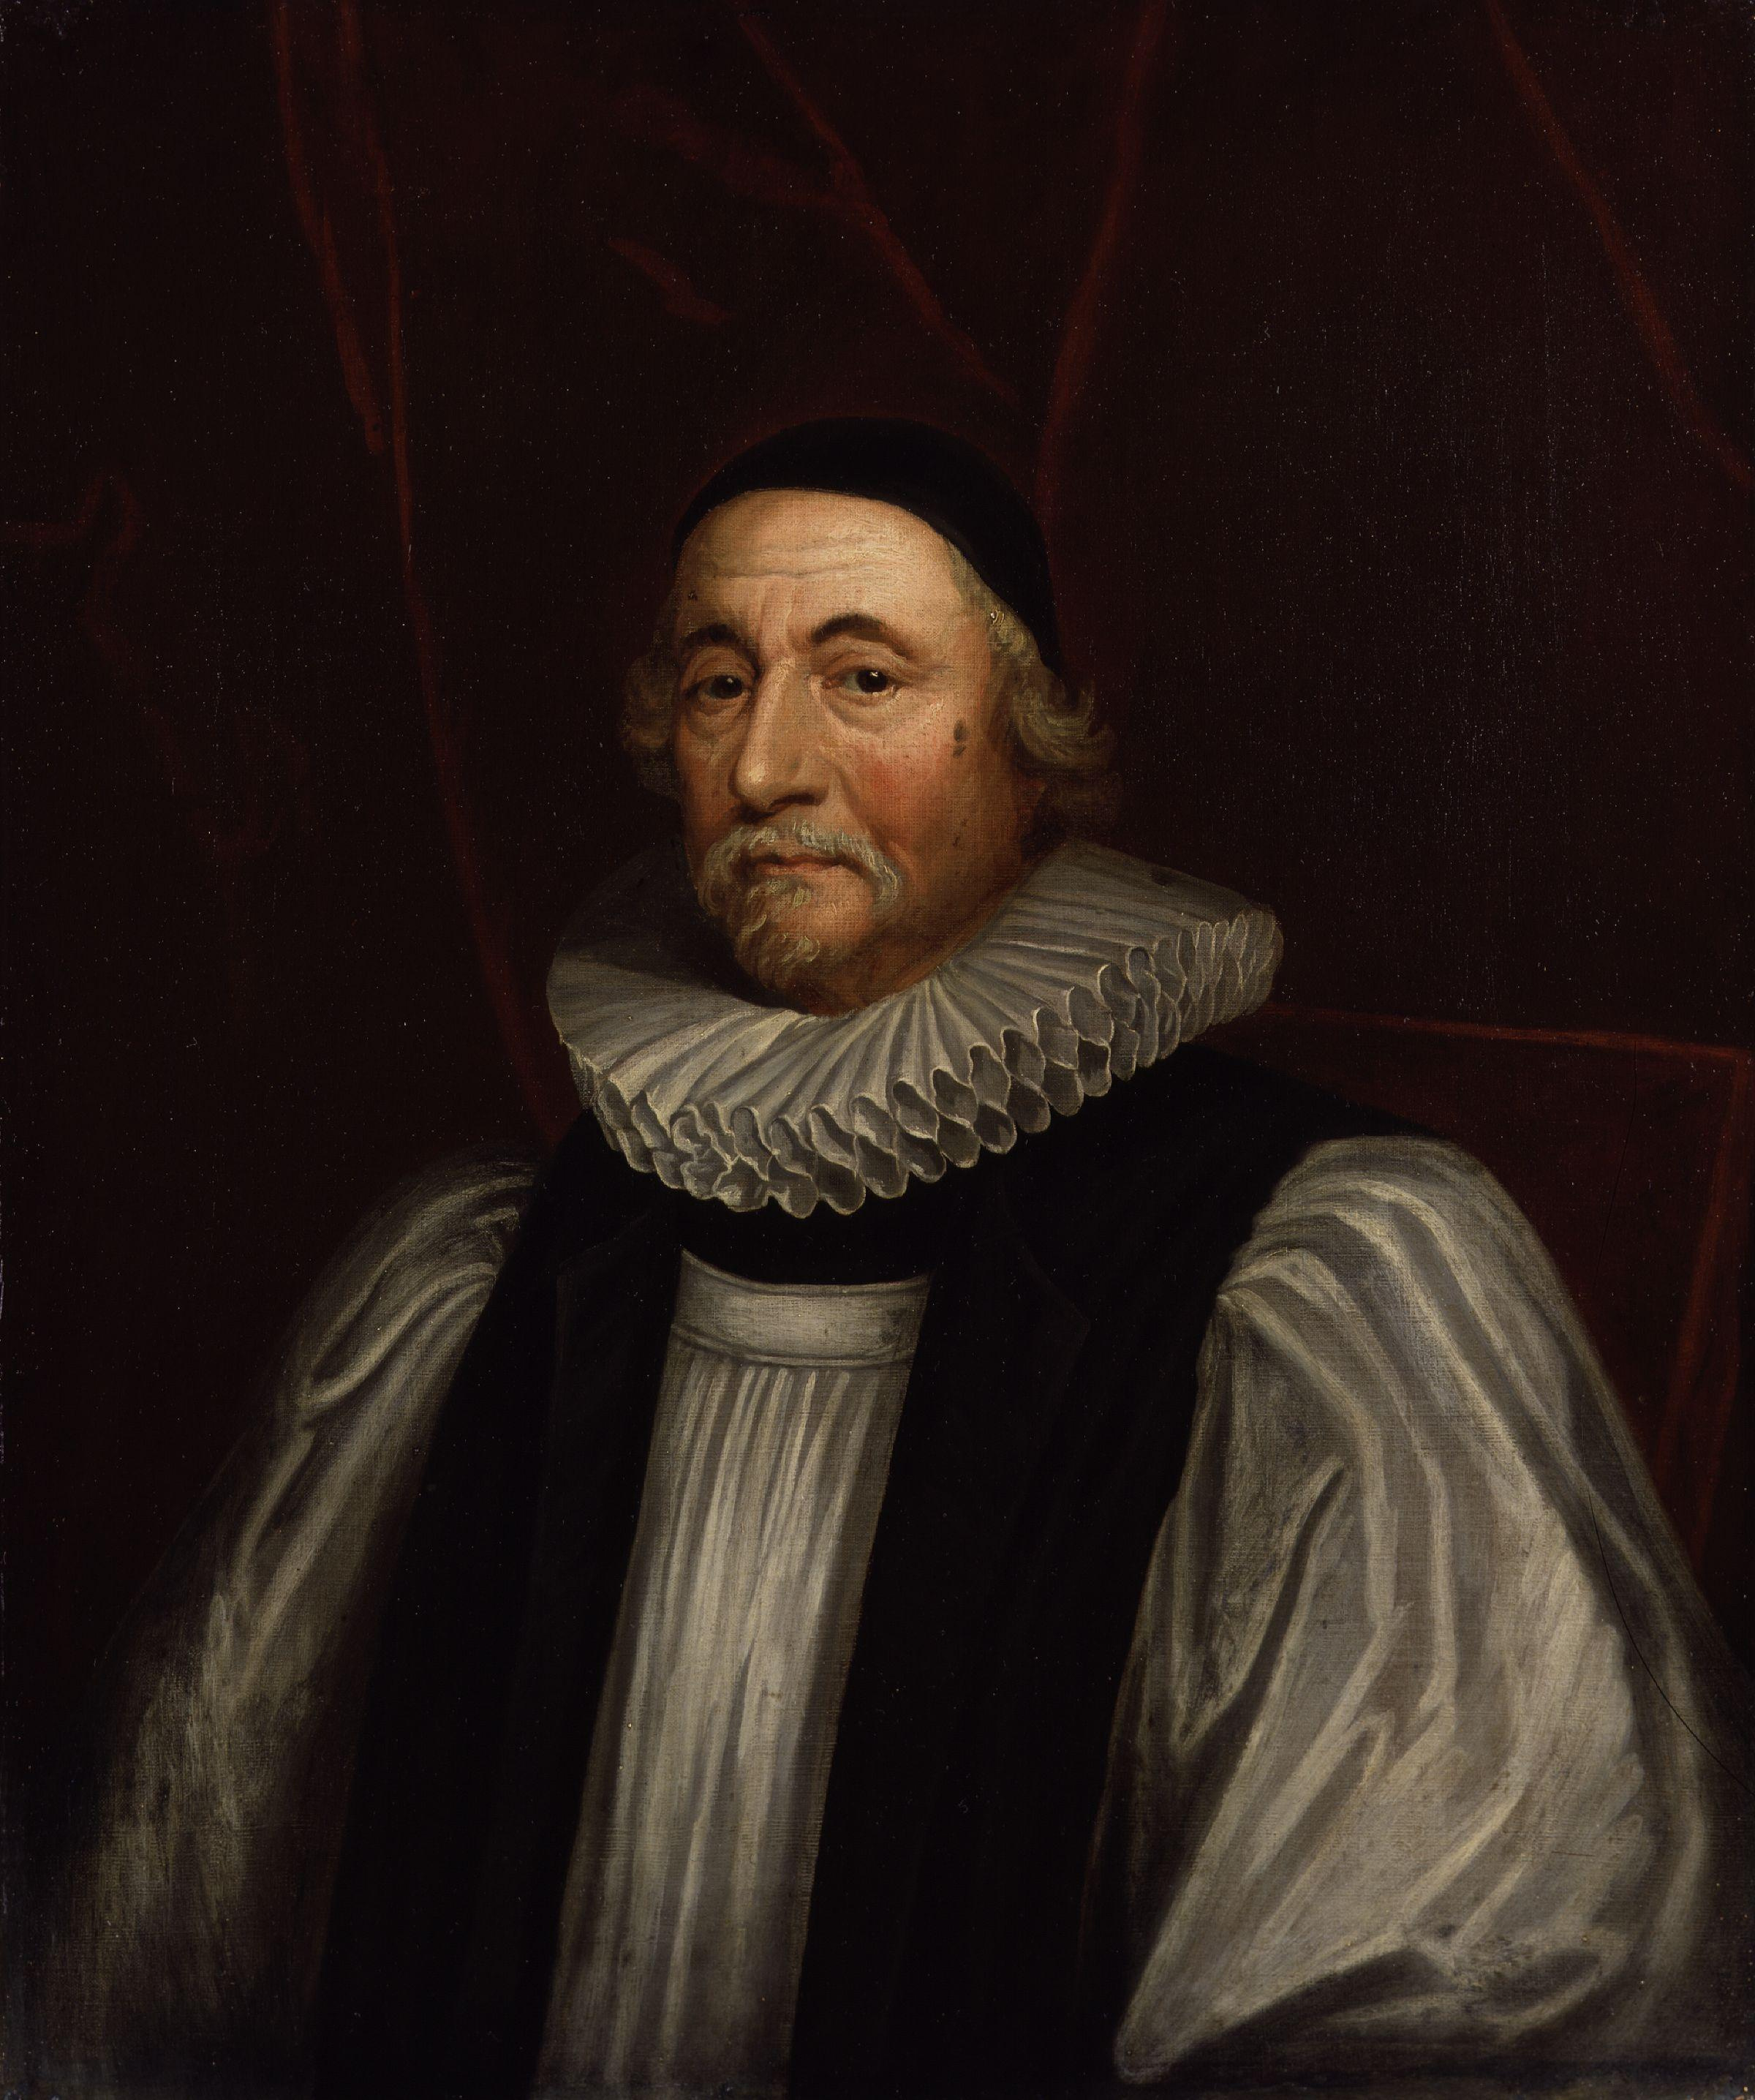 james_ussher_by_sir_peter_lely.jpg